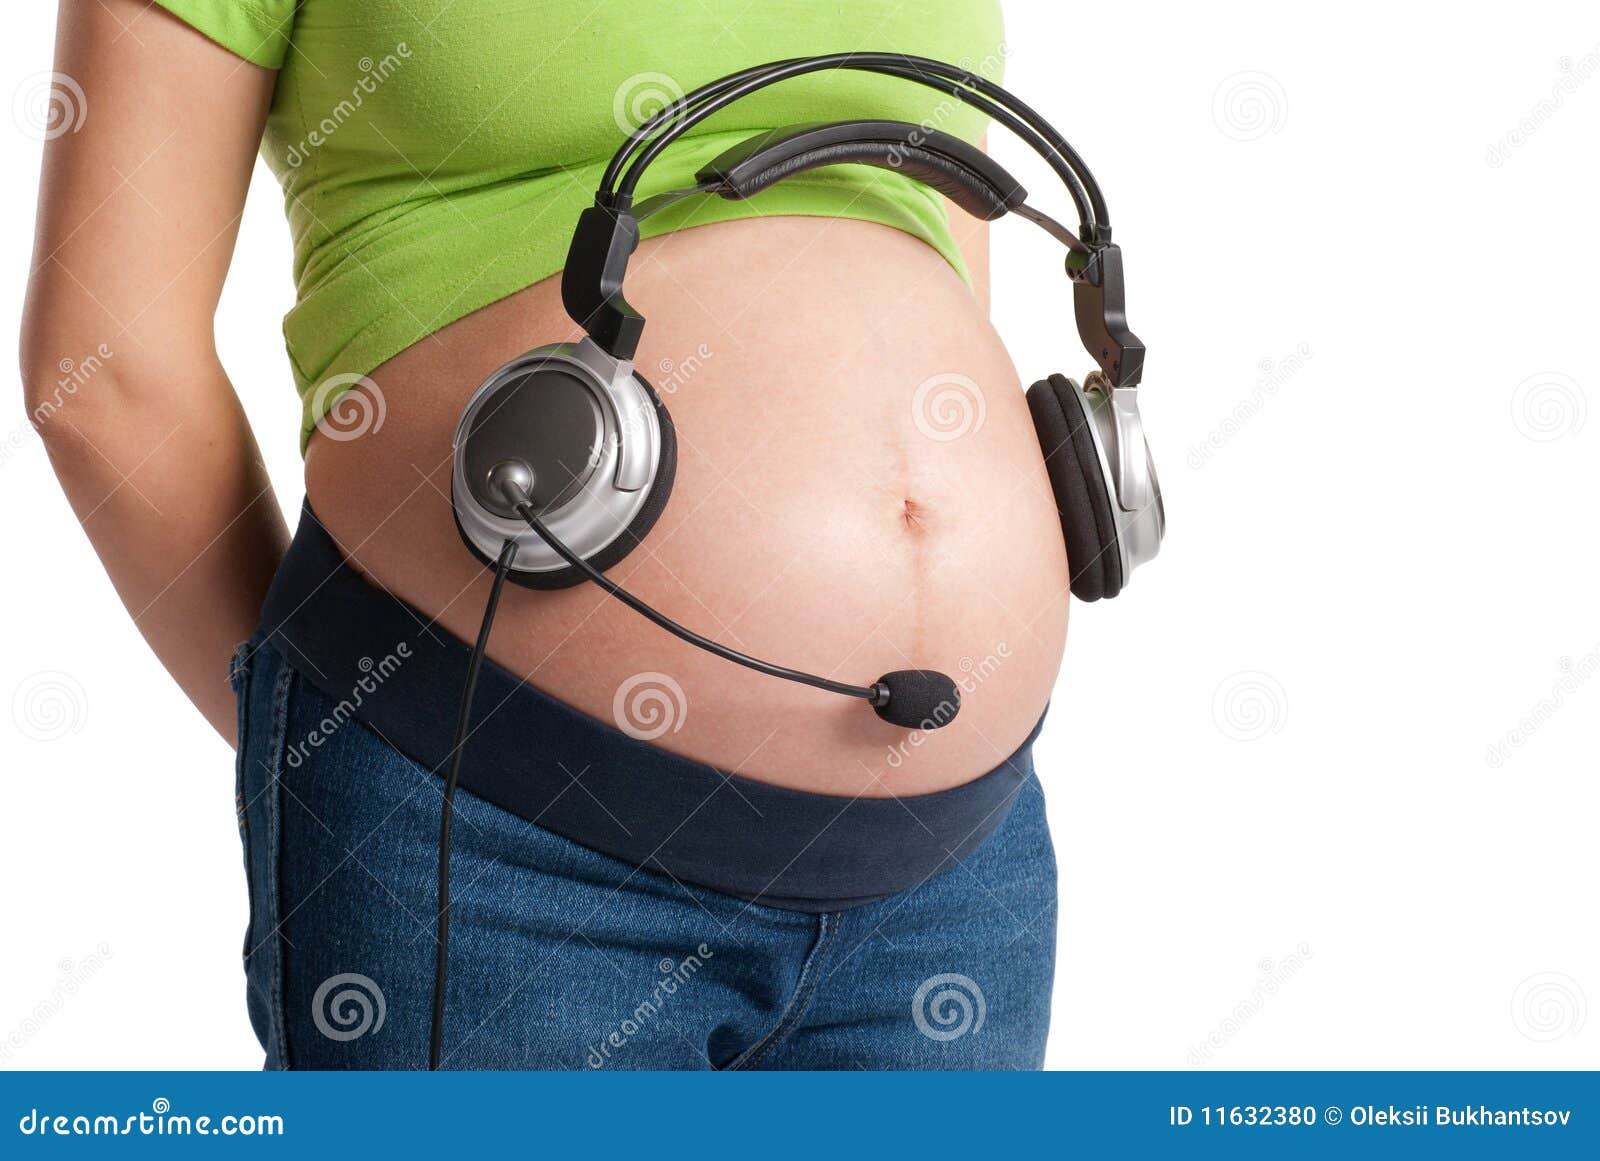 Pretty Pregnant Woman Putting Headphones On Her Belly Stock Photo, Picture  and Royalty Free Image. Image 59147162.